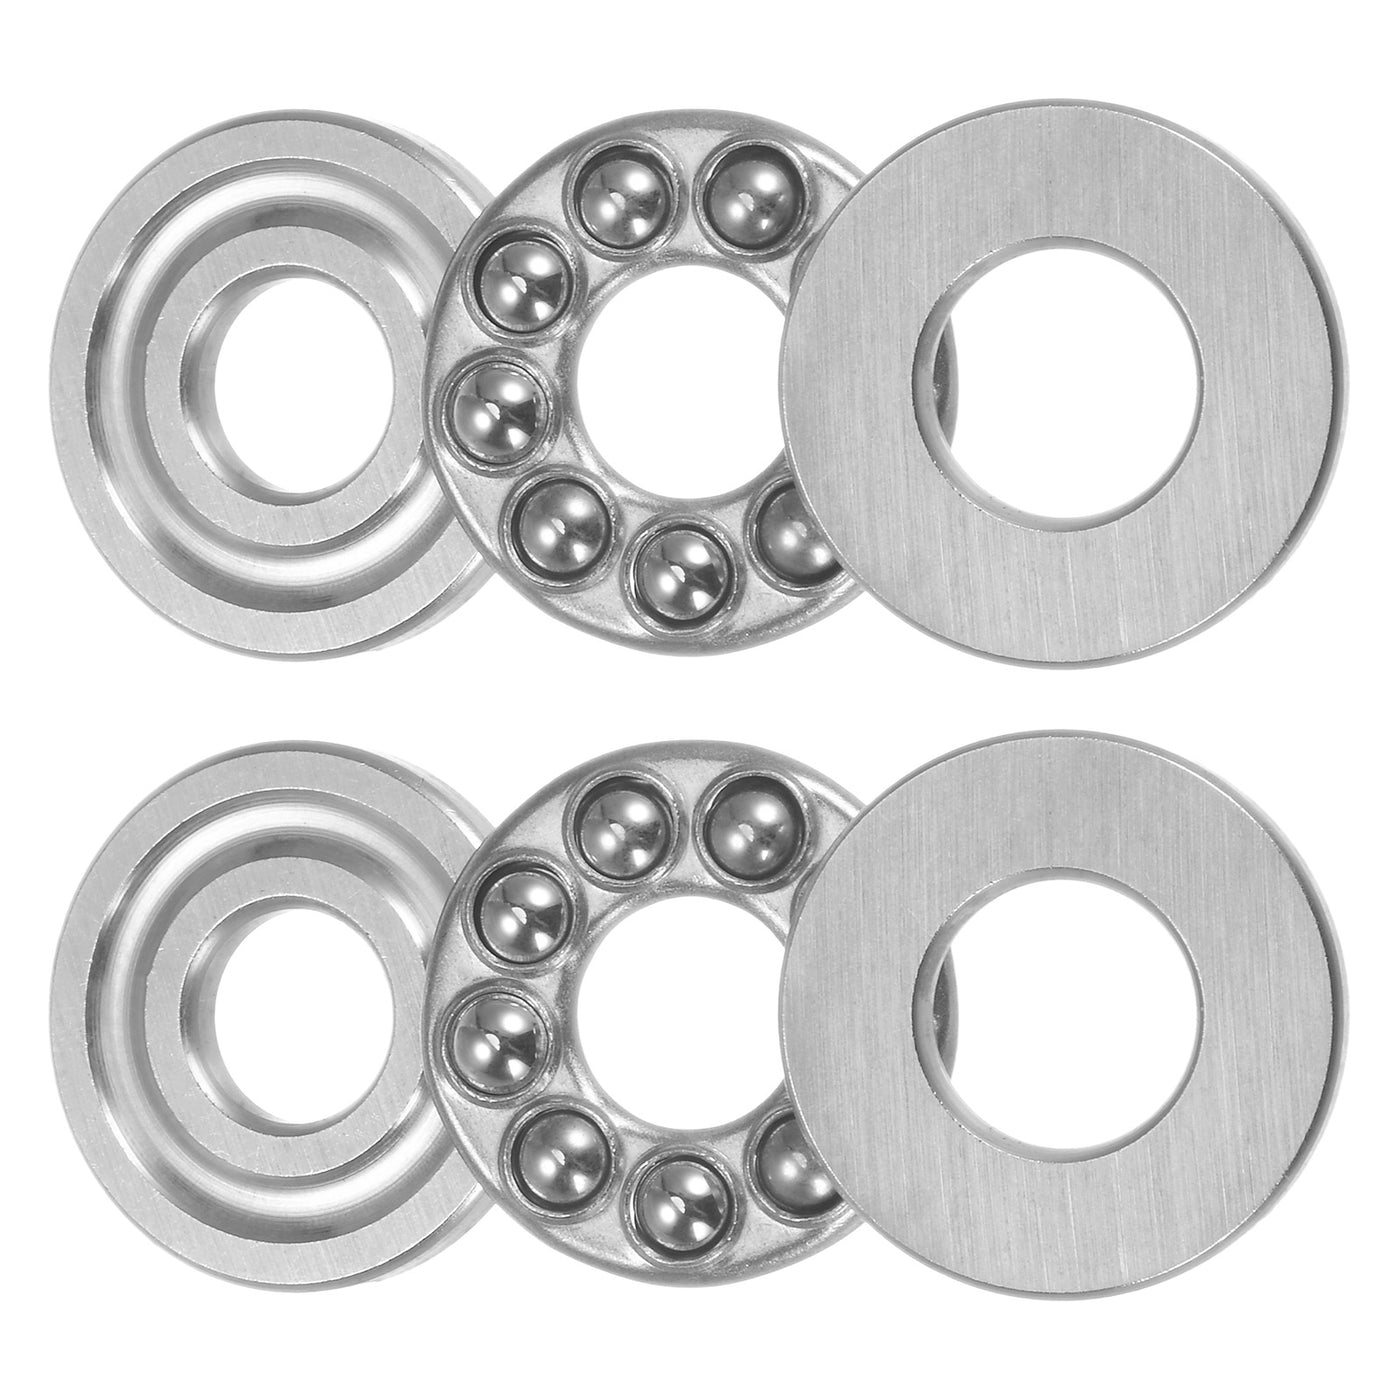 uxcell Uxcell S51200 Thrust Ball Bearing 10x26x11mm Stainless Steel with Washers 2pcs